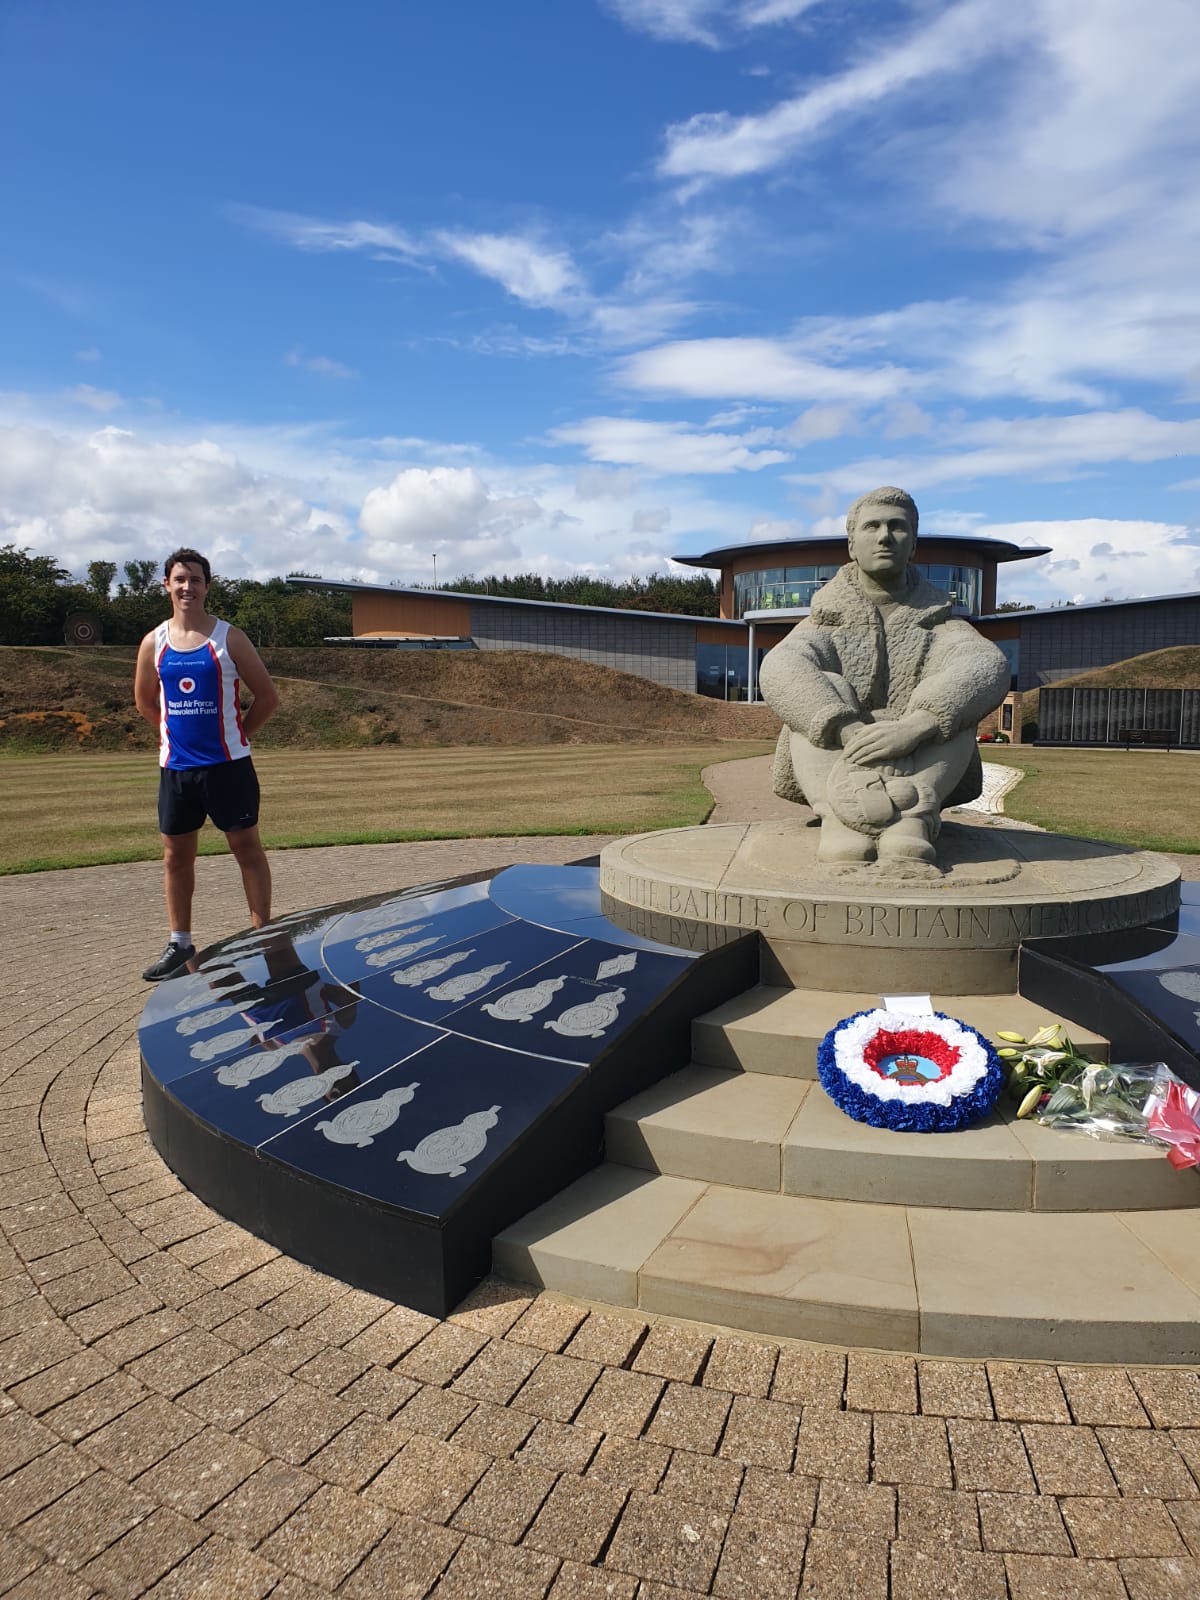 Flight Lieutenant Wilce, concluded the event with his run to the Battle of Britain Memorial, Memorial located on the White Cliffs at Capel-le-Ferne, near Folkestone